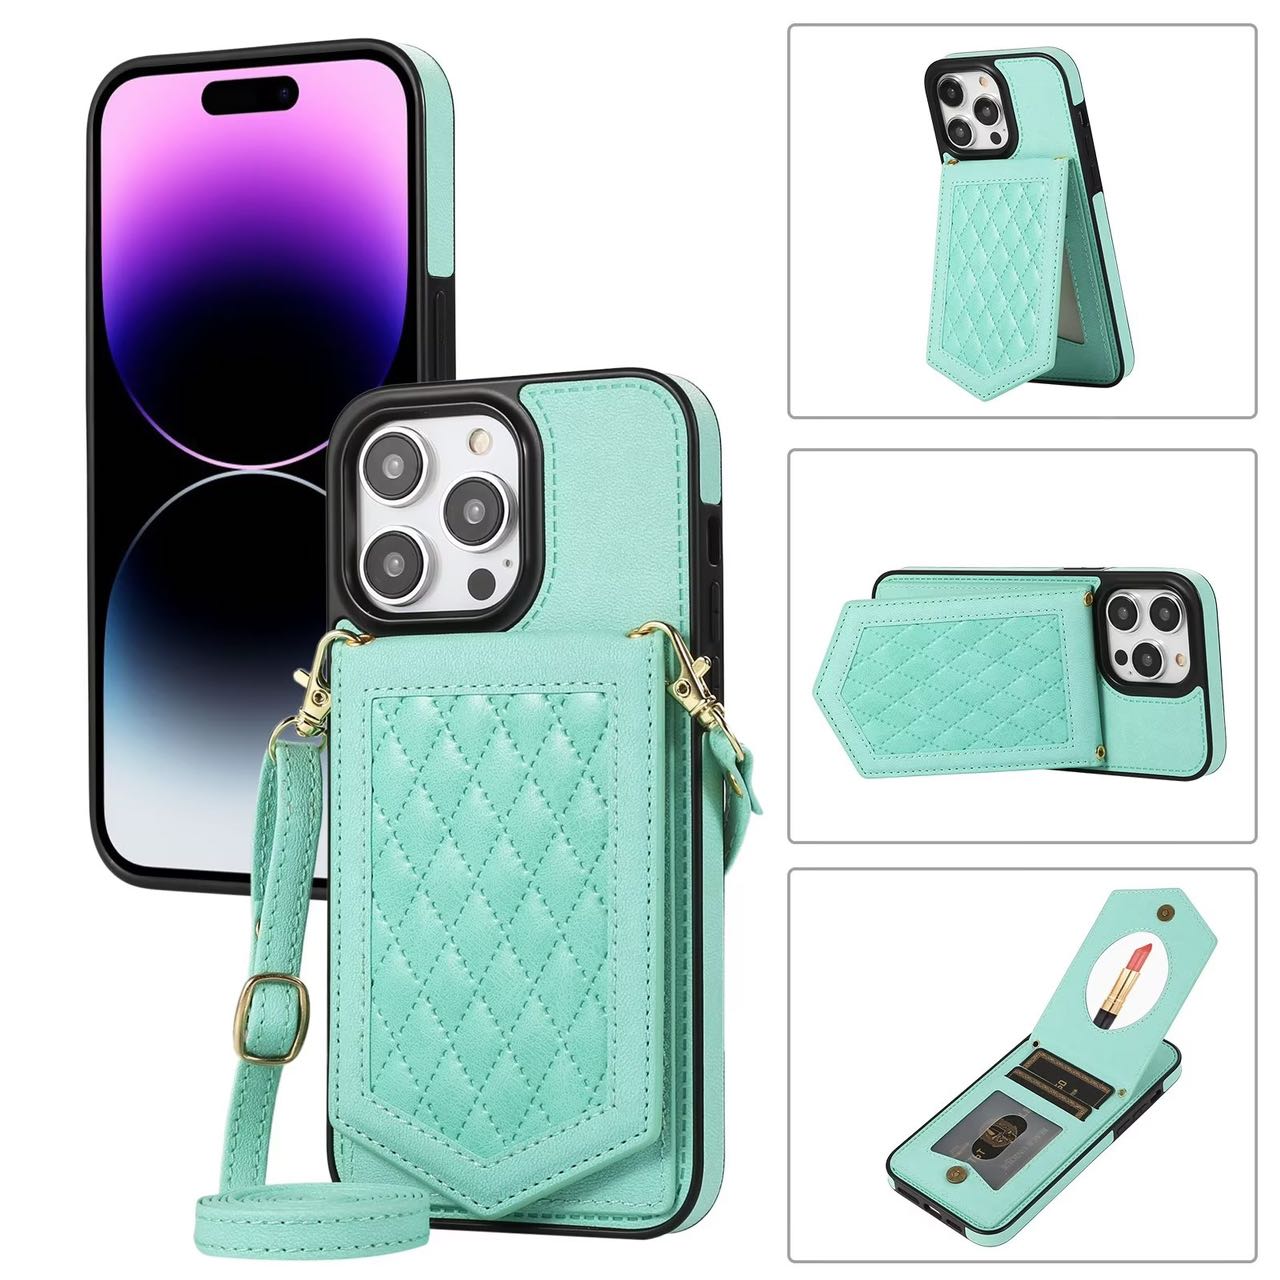 VICTORIA Crossbody Wallet Case for iPhone 7/8 Plus with Chain Strap –  Vaultskin